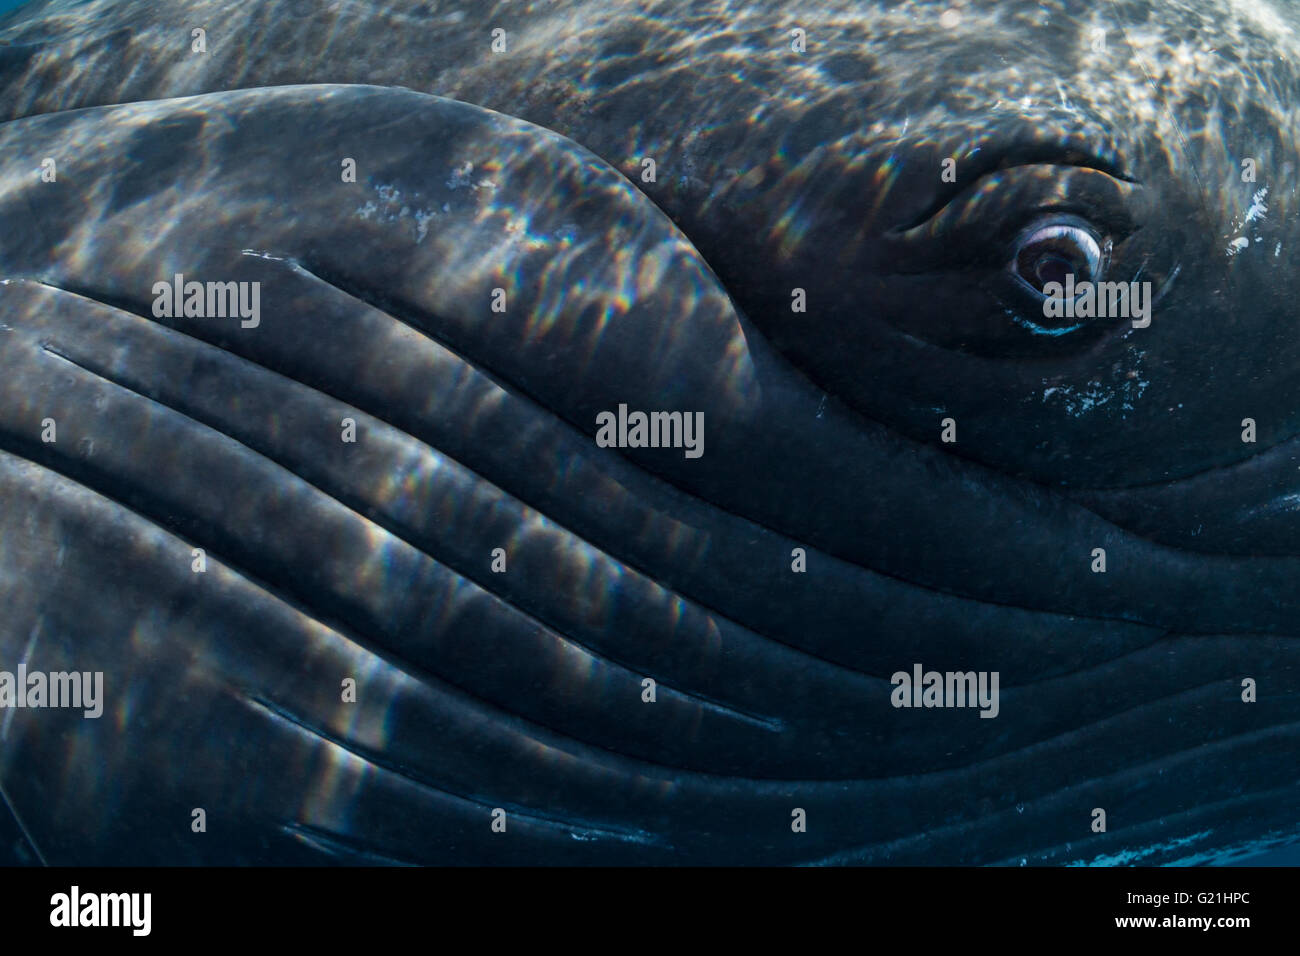 Eye of a humpback whale (Megaptera novaeangliae), detail, Silver Banks, Dominican Republic Stock Photo